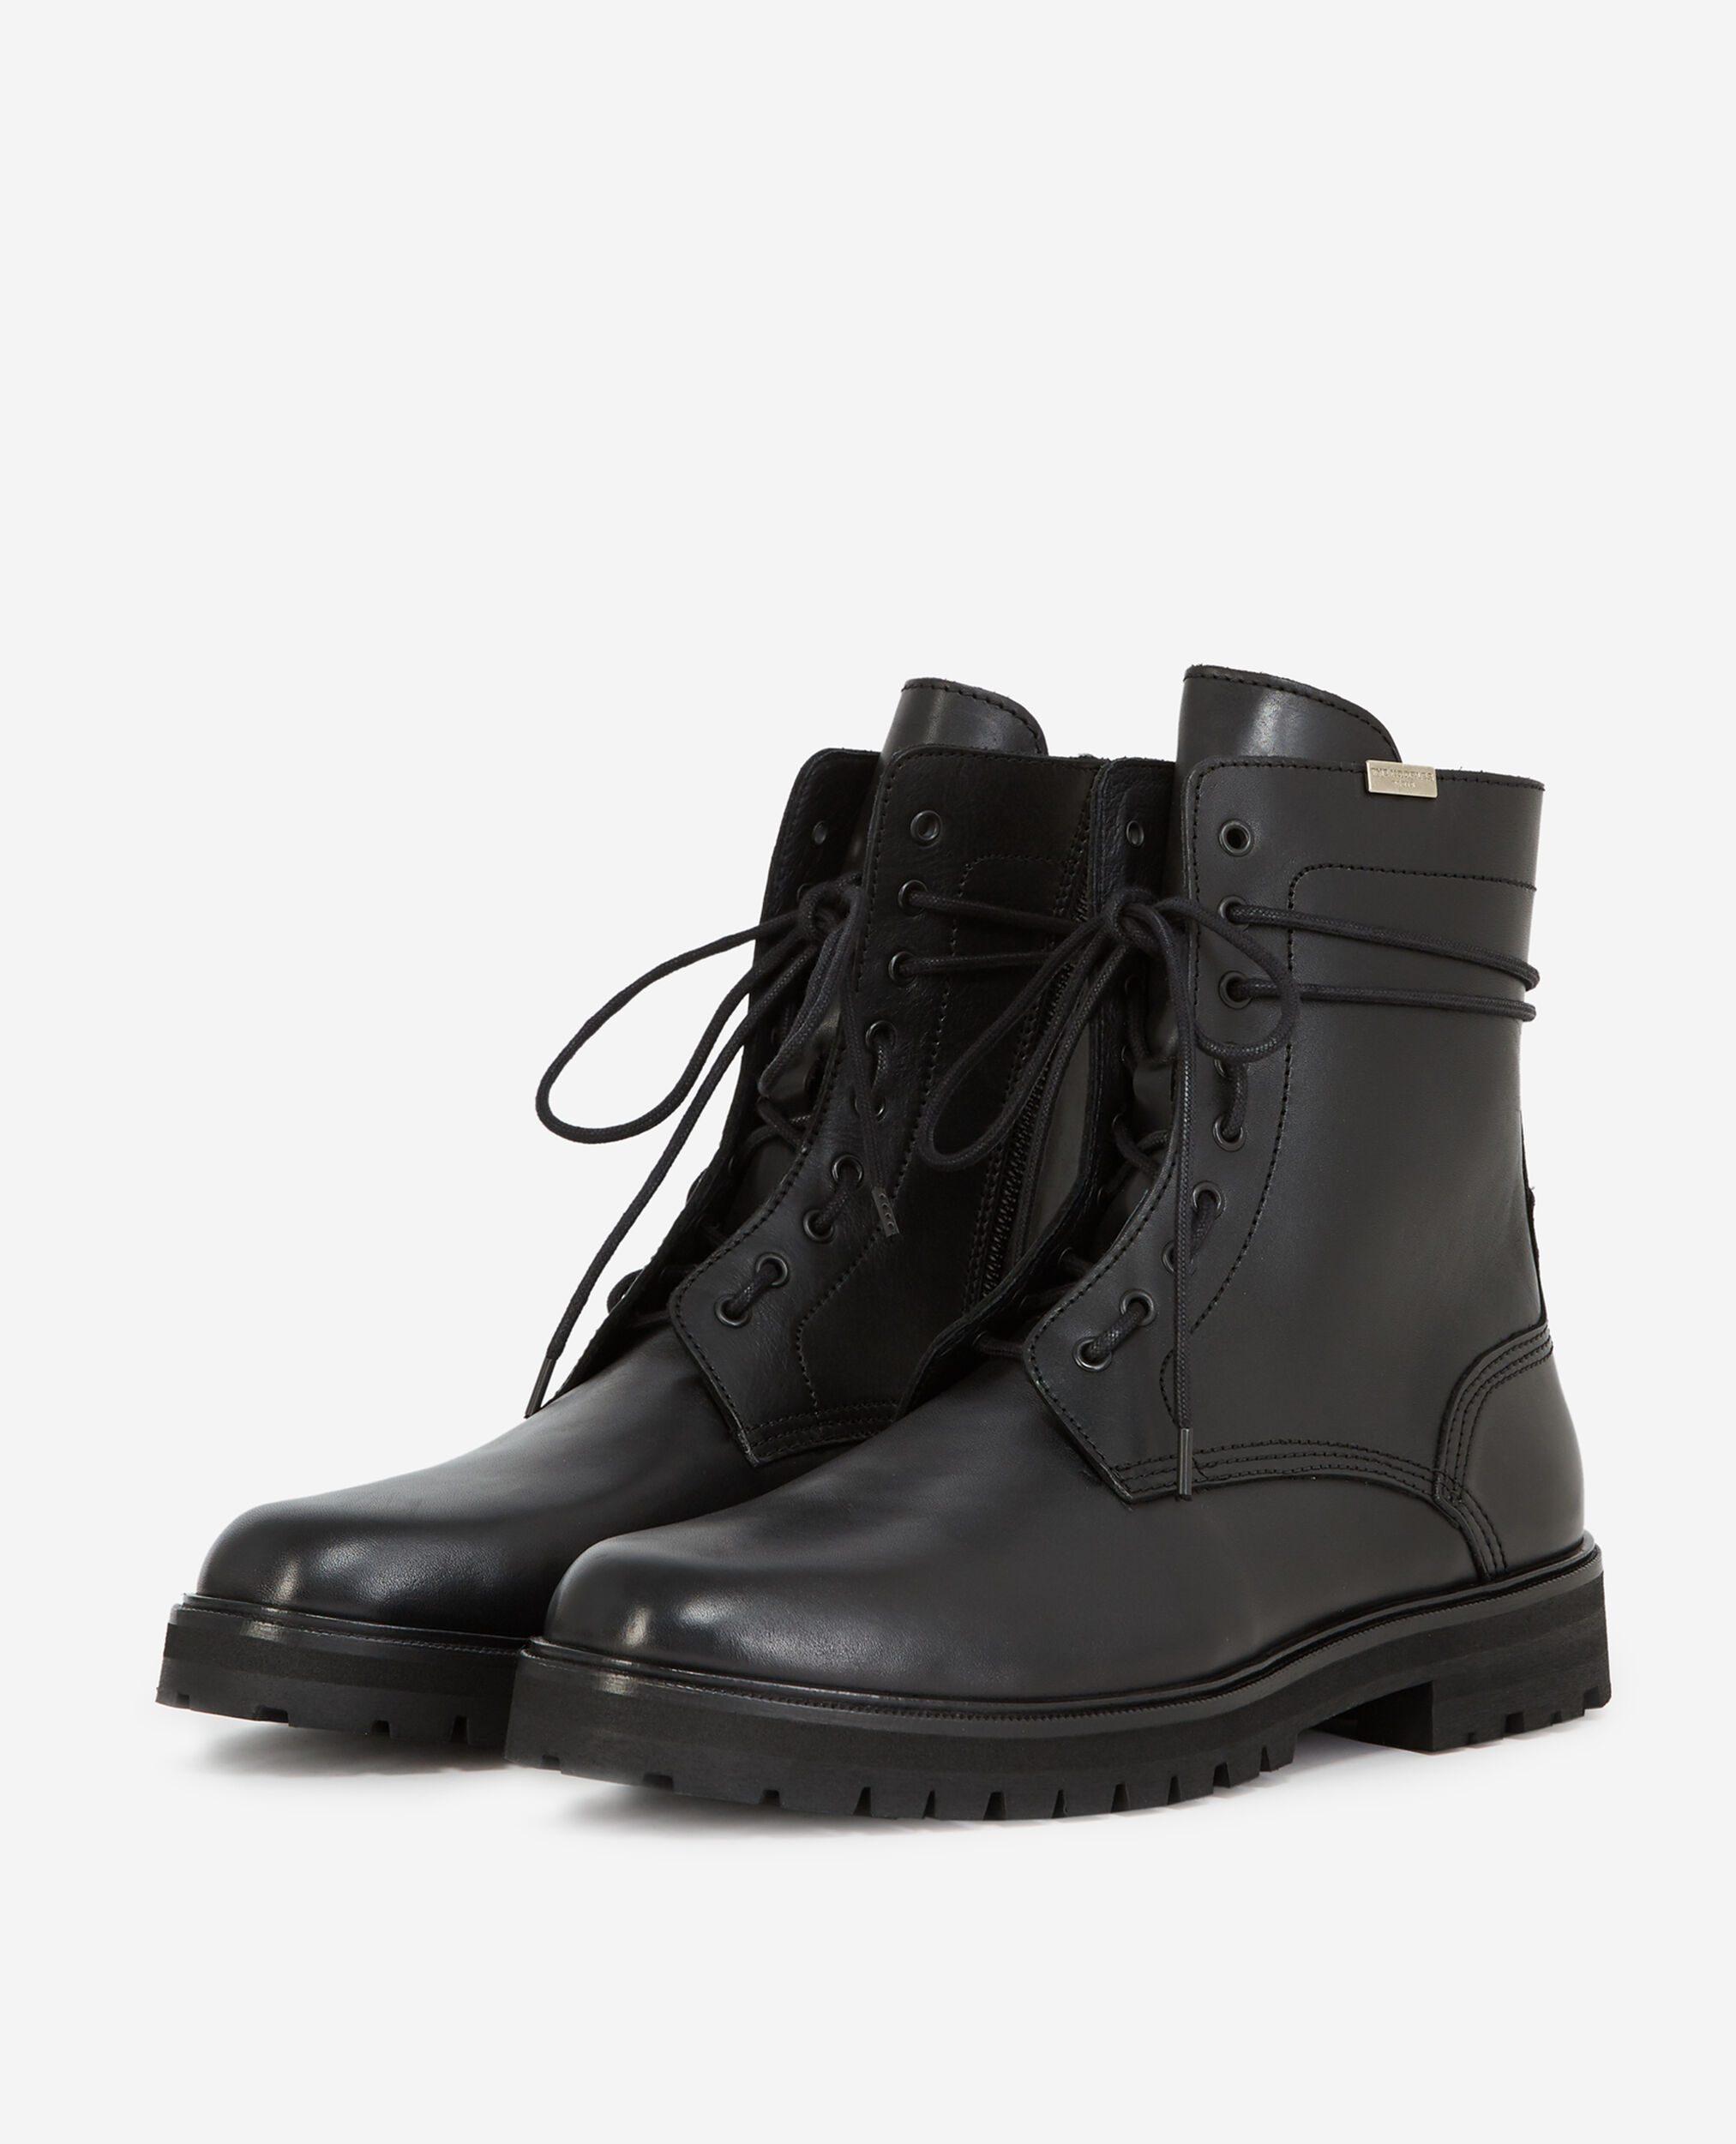 Black boots in leather with side lace detail, BLACK, hi-res image number null